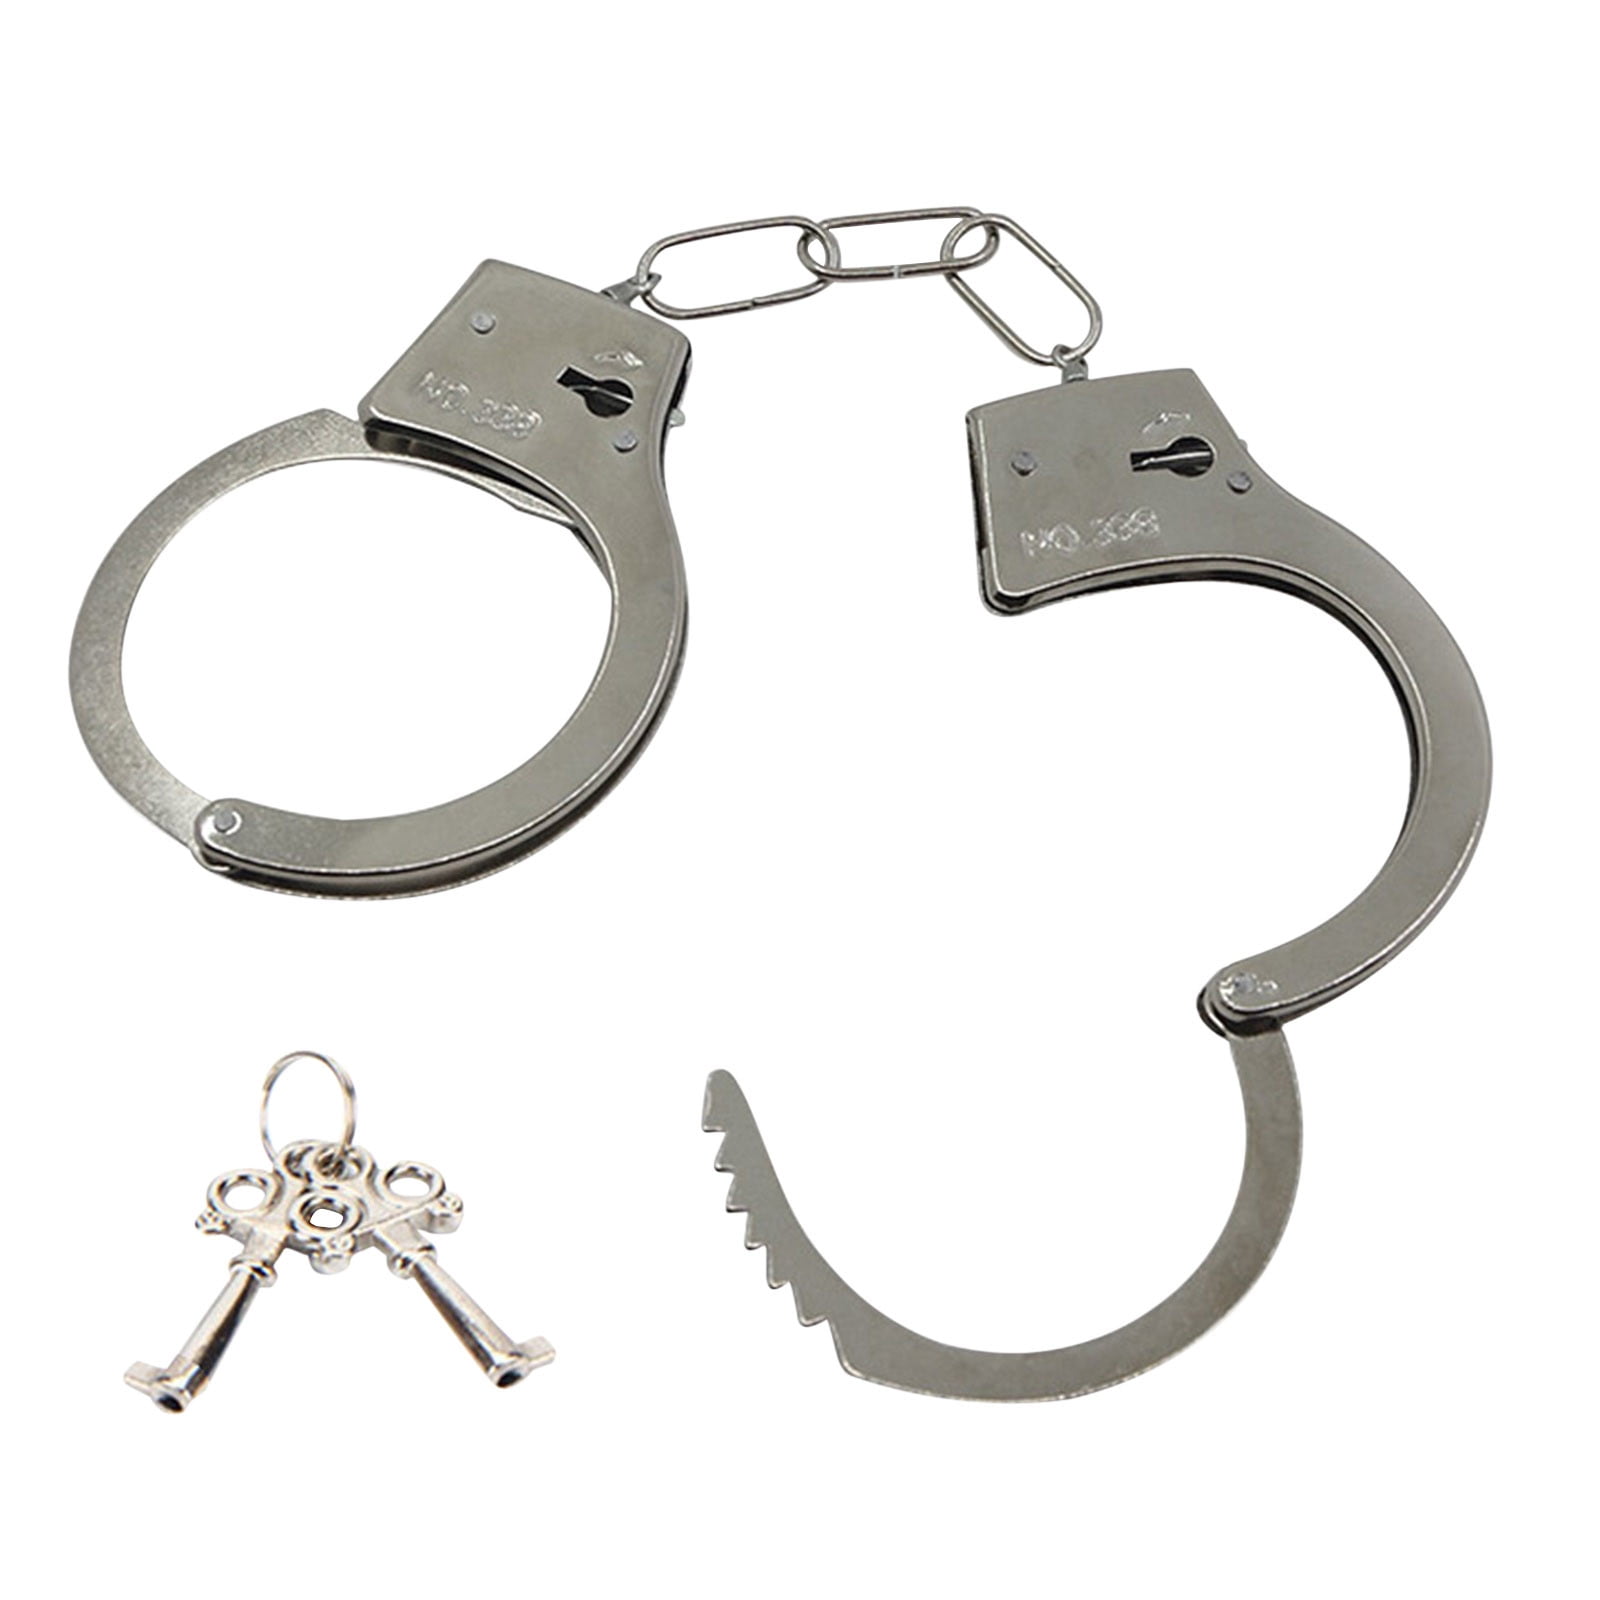 A Pair of Realistic Metal Handcuffs & Keys for Fancy Dress etc New & Boxed 